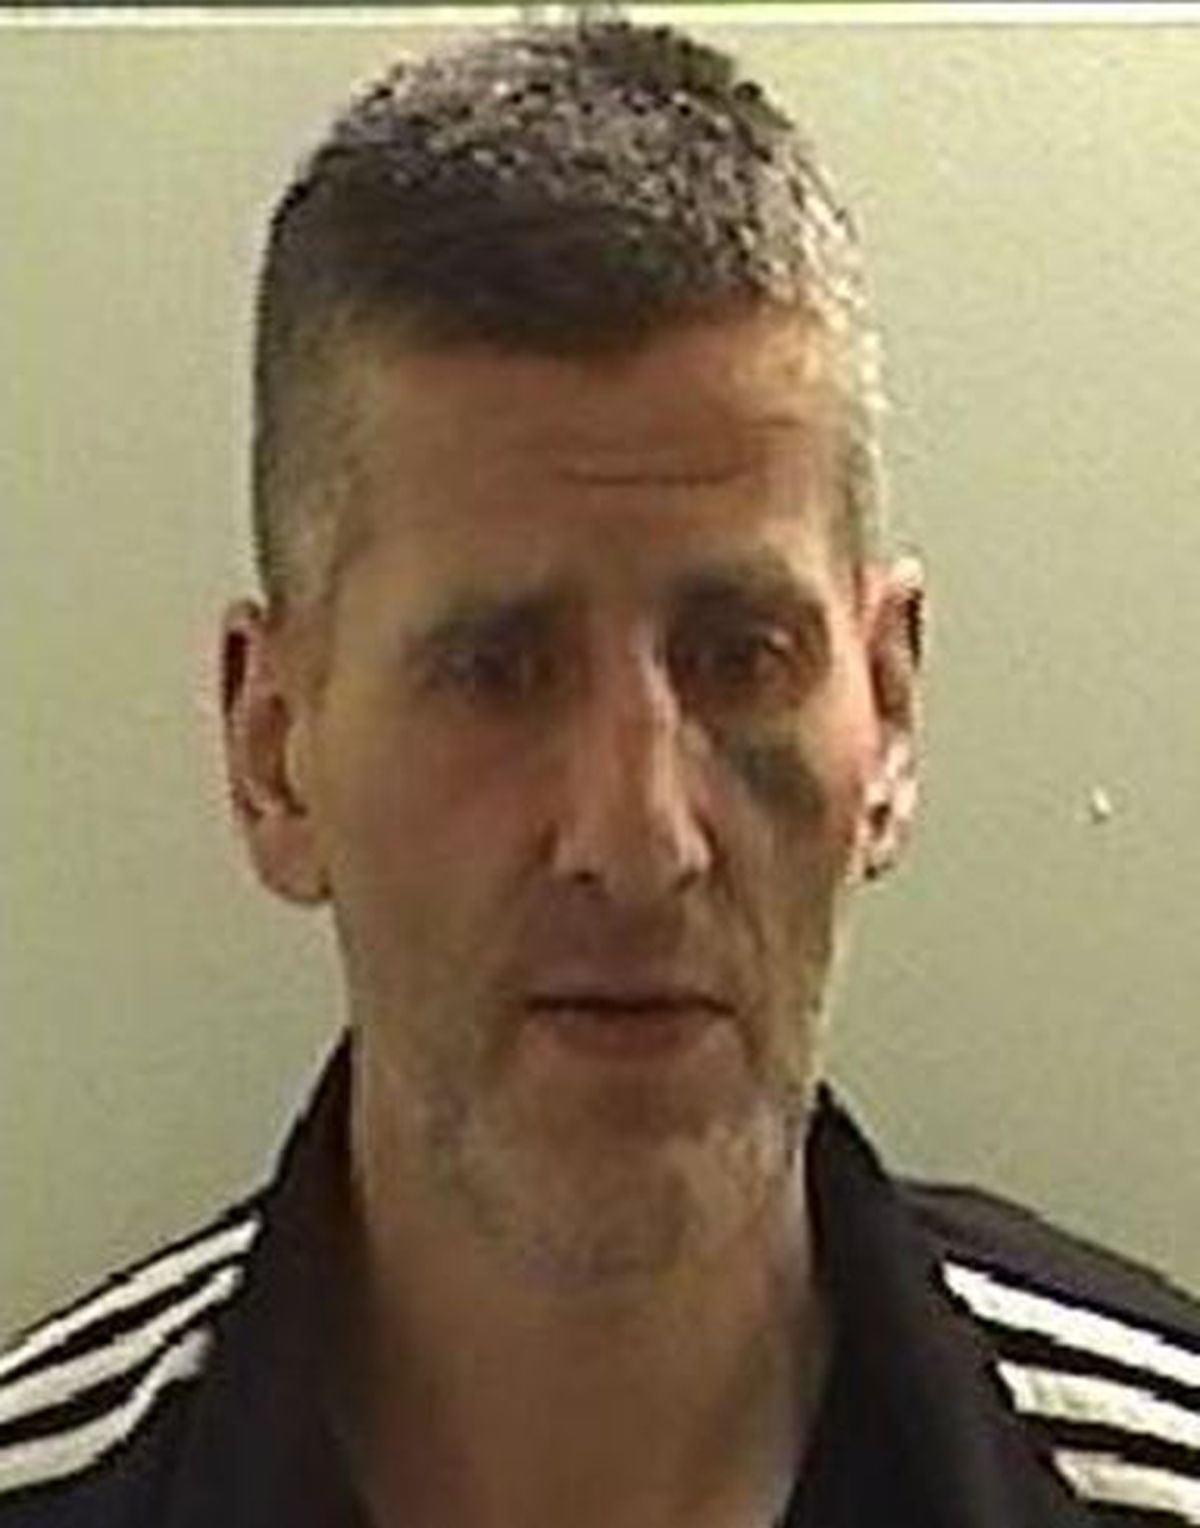 Man with links to West Midlands escapes prison near Derby Express & Star